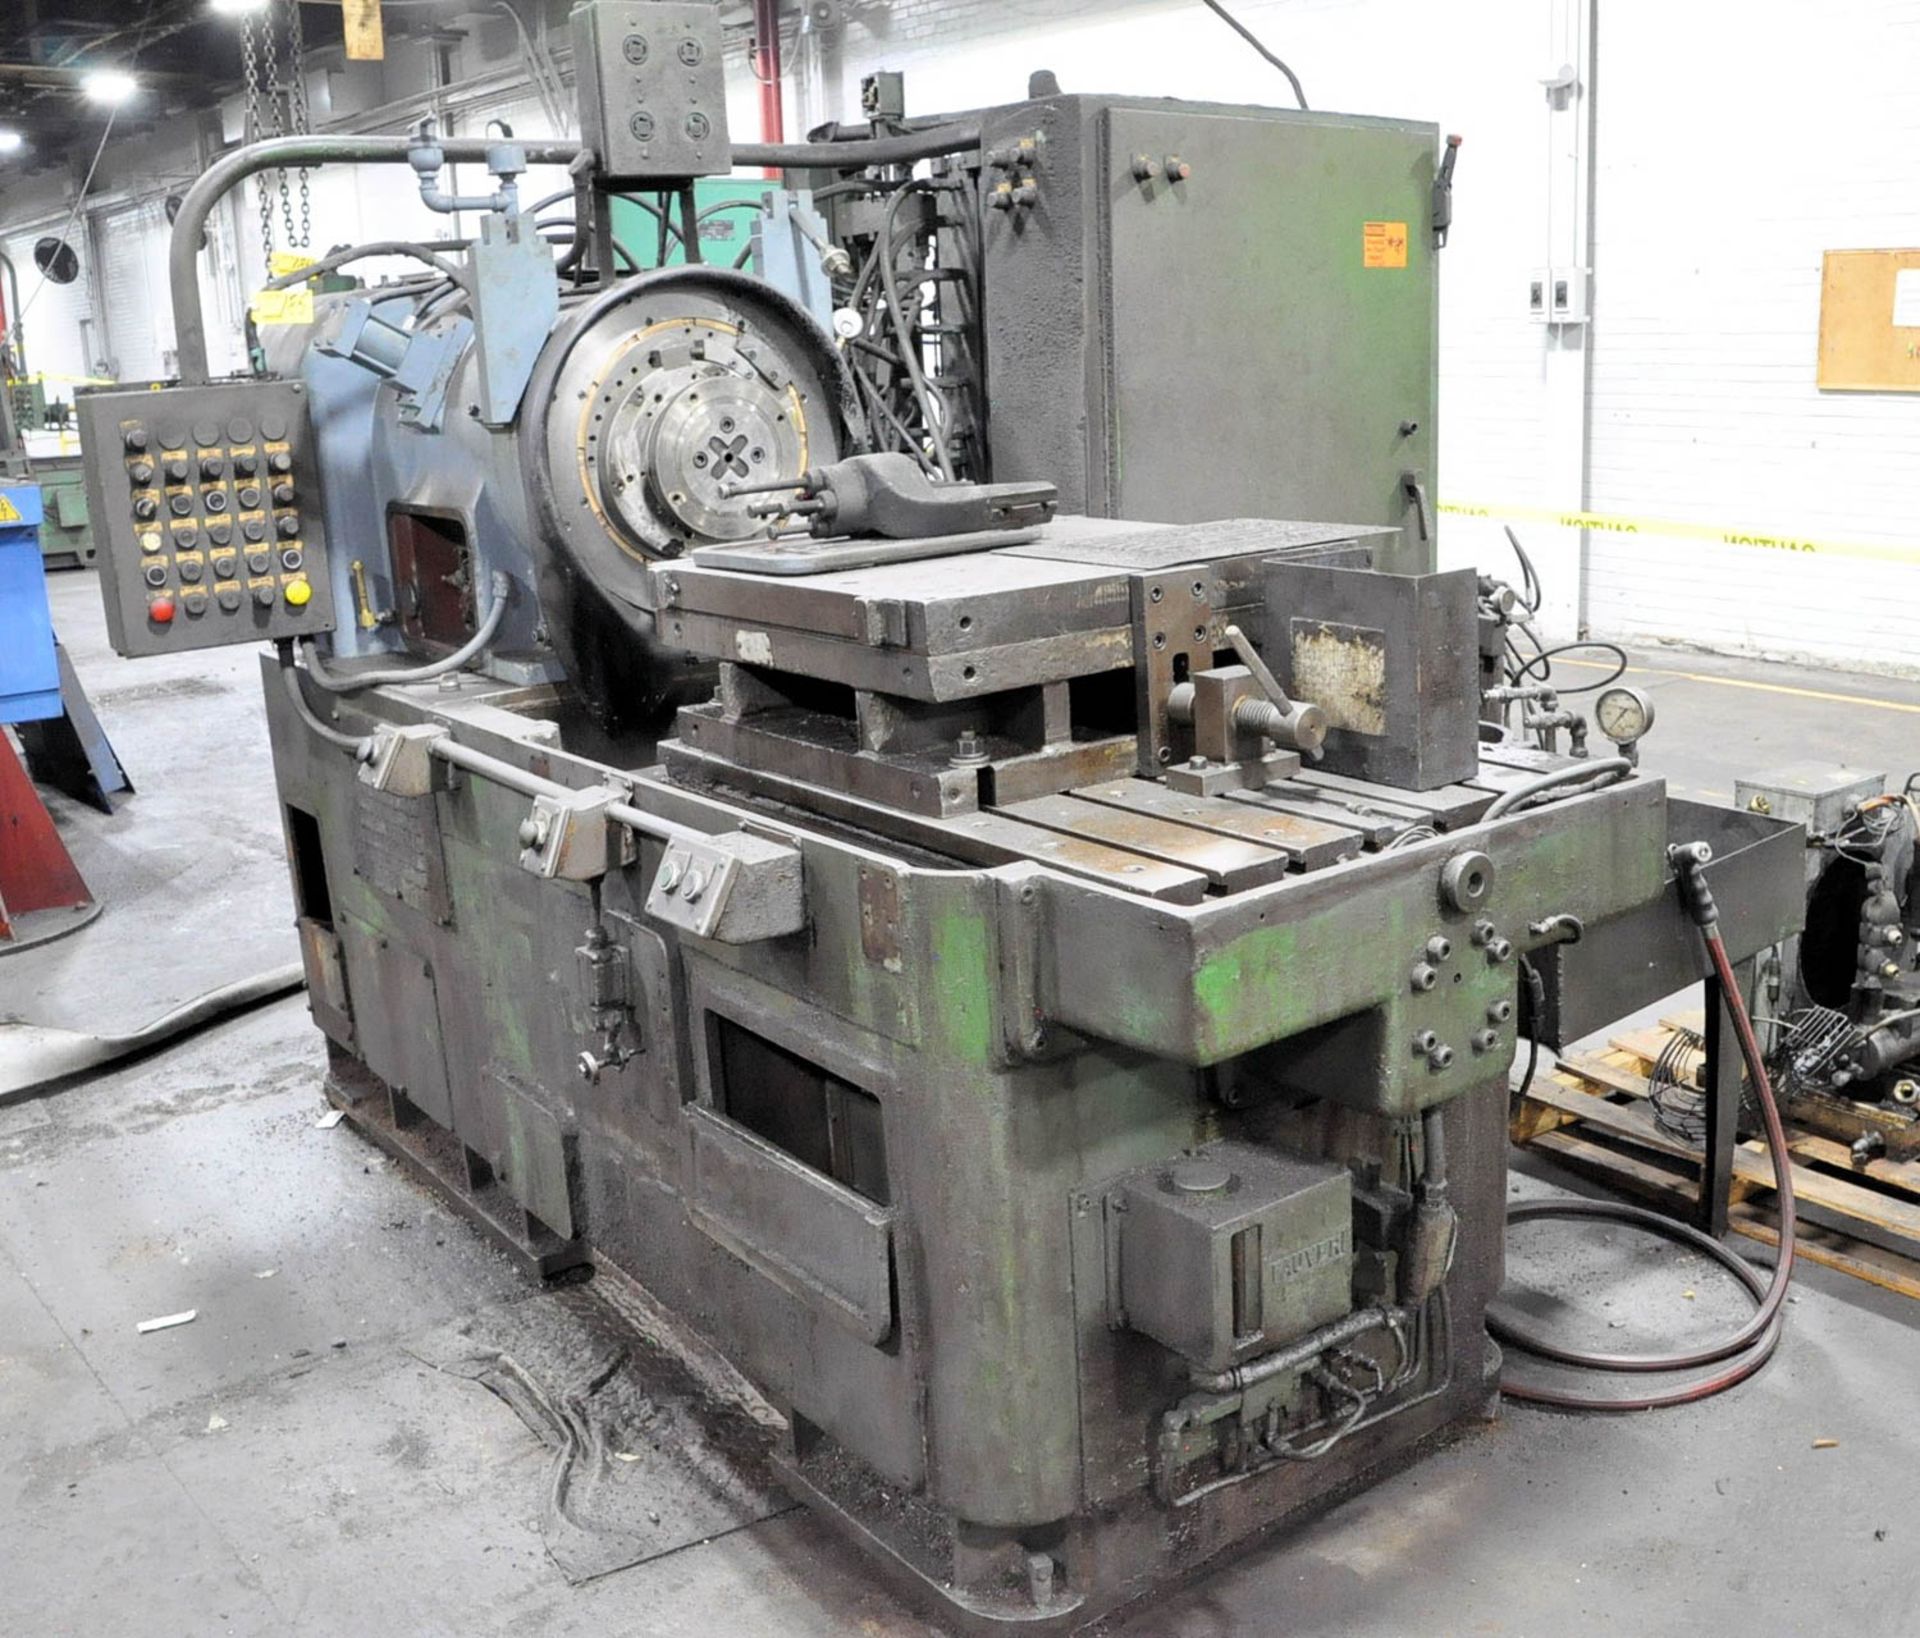 HOOVER FLANGE CUTTING MACHINE, S/N: N/A, 24" X 36" T-SLOTTED WORK SURFACE, PUSH BUTTON CONTROL, (#